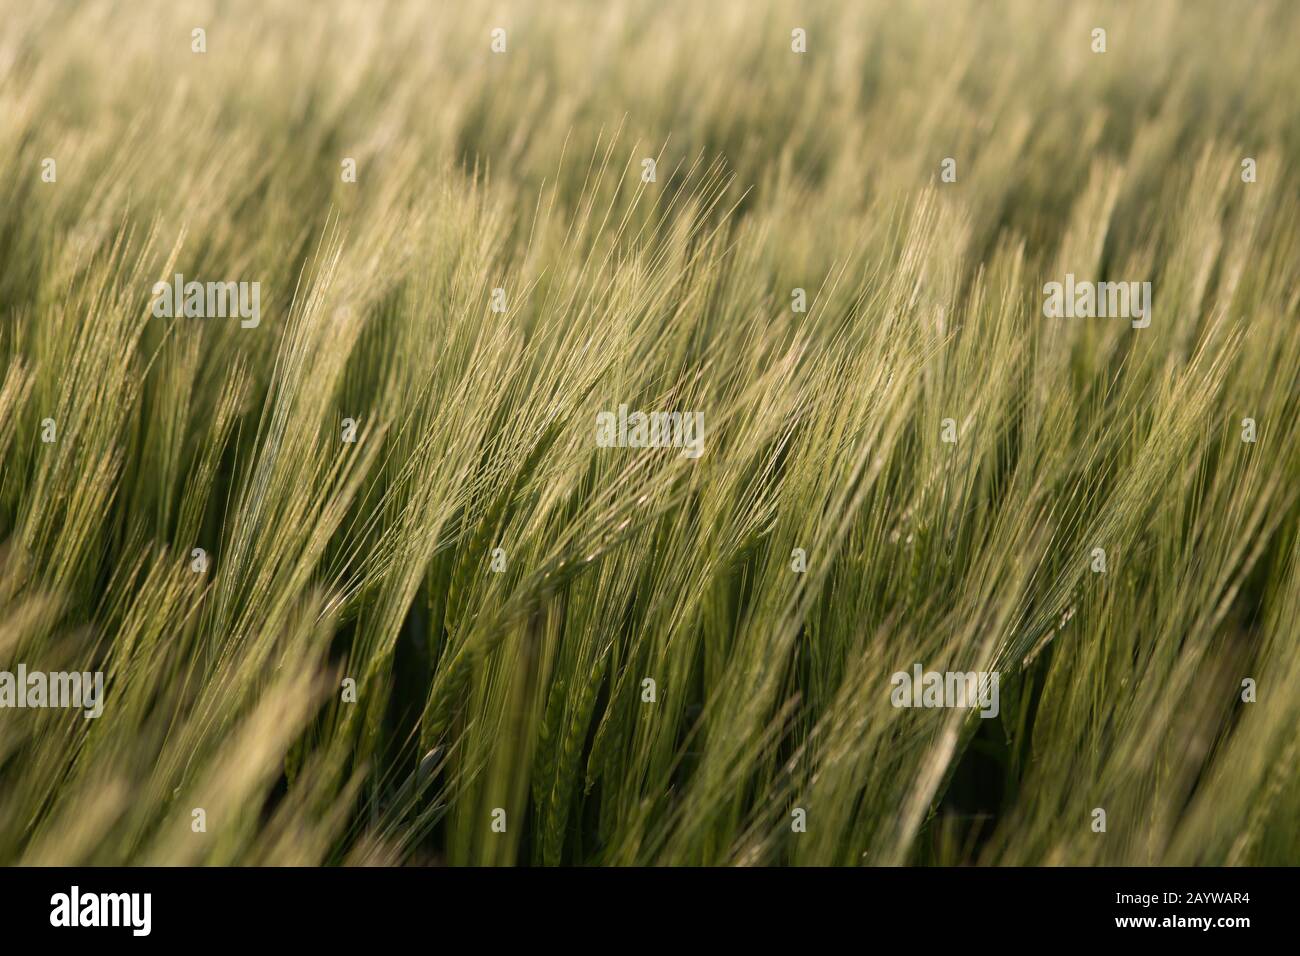 Wheat spikelets leaning in the breeze at sunset, St. Andrews, Fife, Scotland. Stock Photo